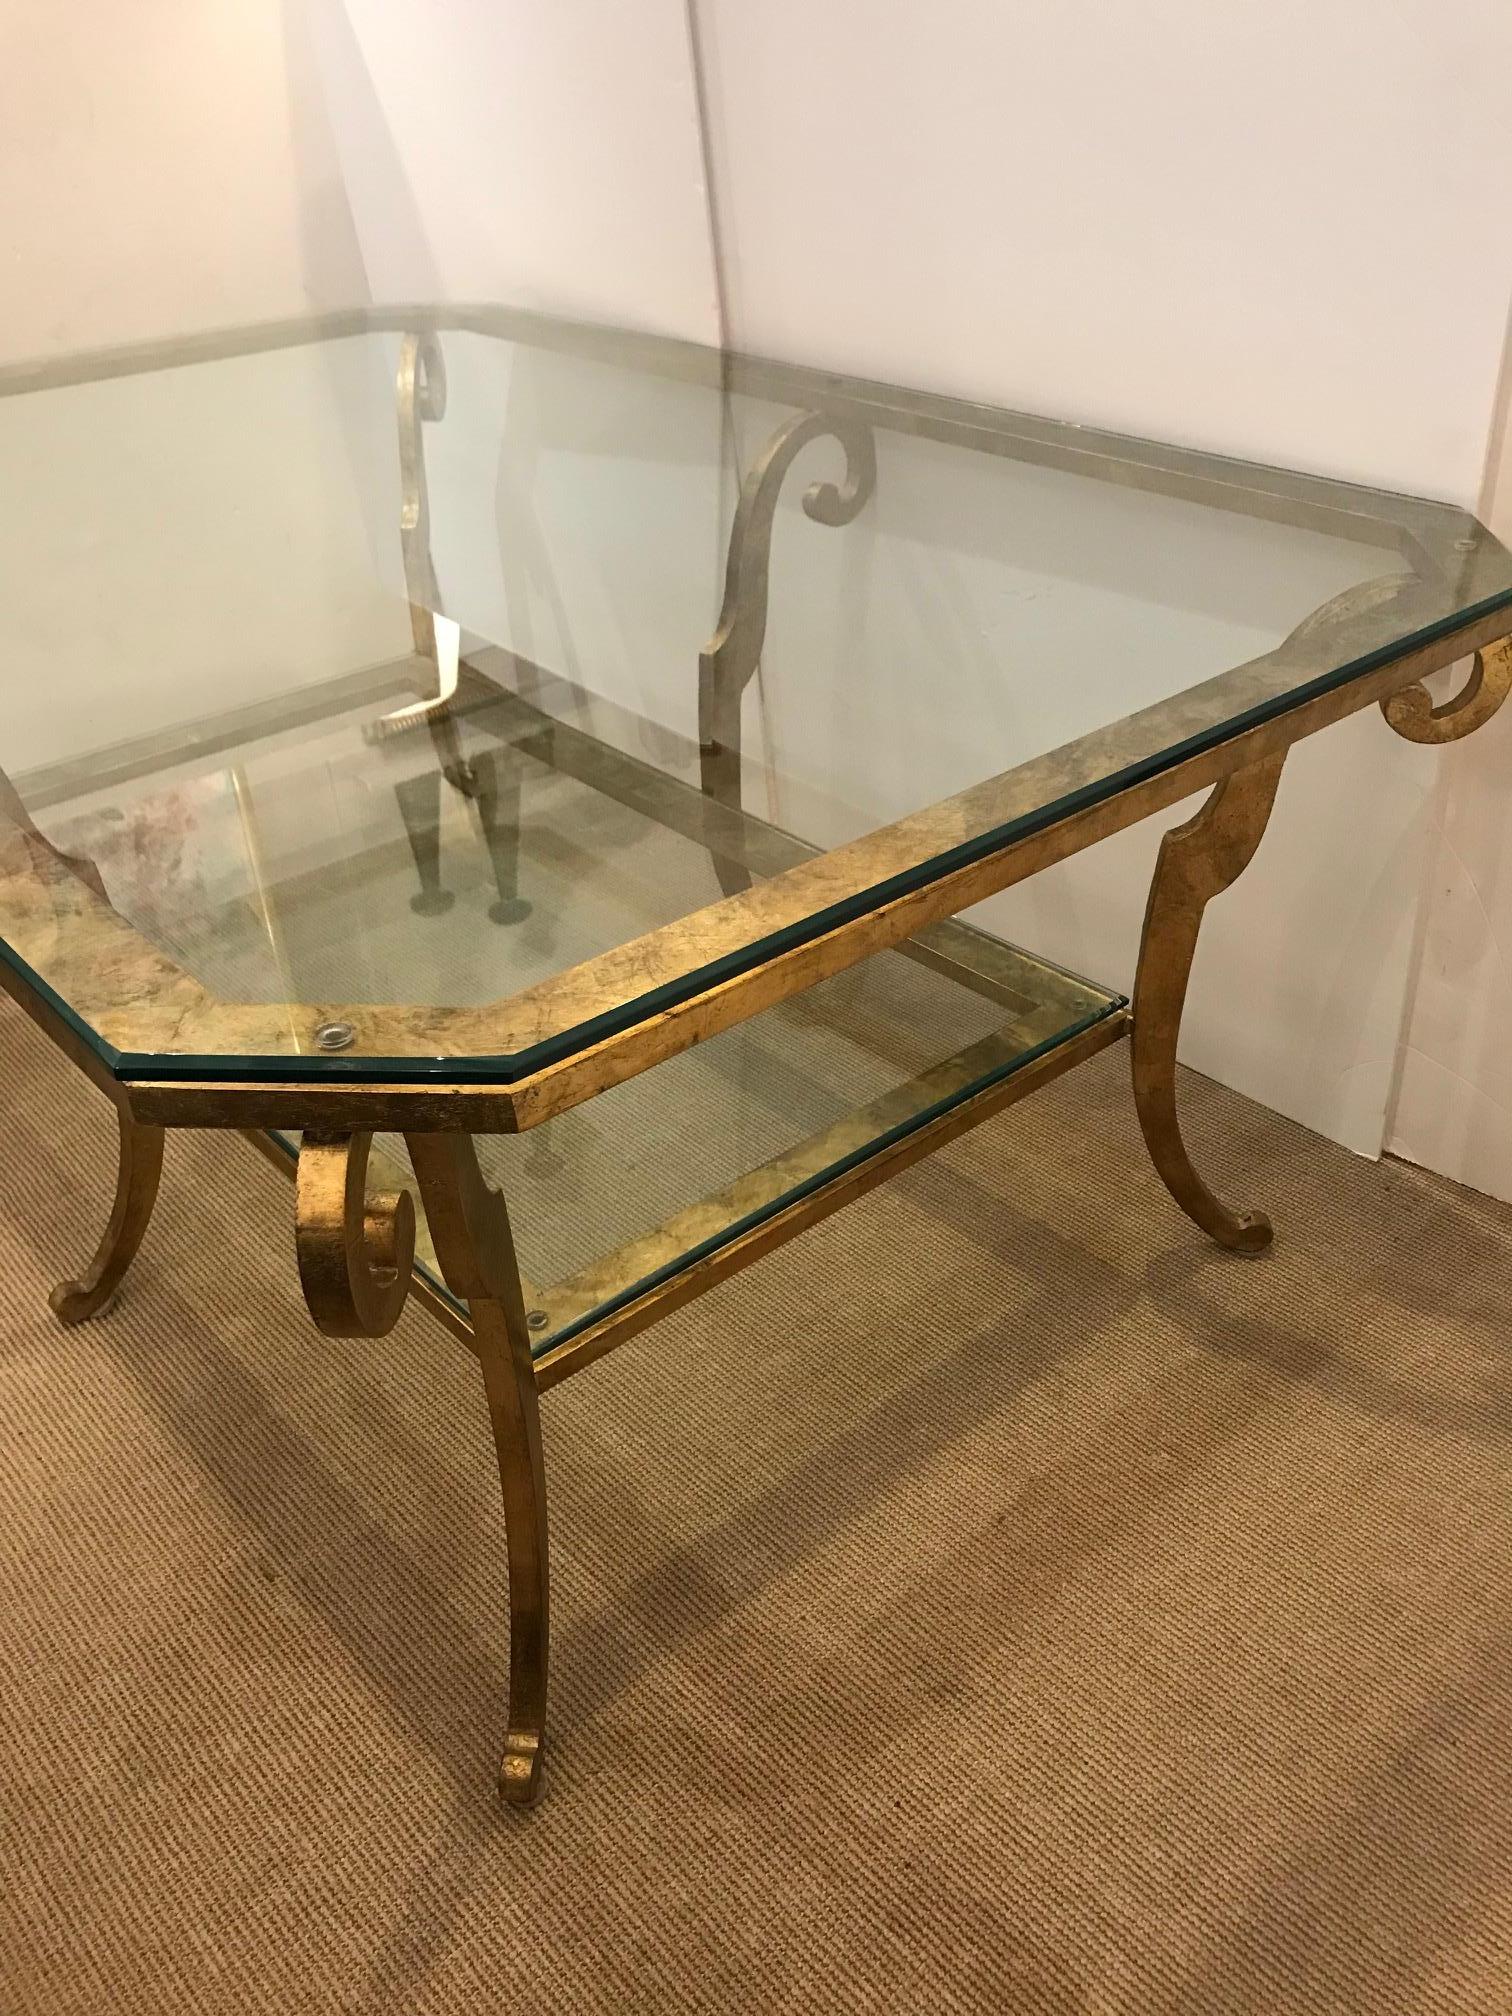 Gorgeous large and heavy gilt iron two-tier coffee table having squared off edges and curlicue curved legs.
Bottom tier 41” W x 20.5” D x 9.75” H.